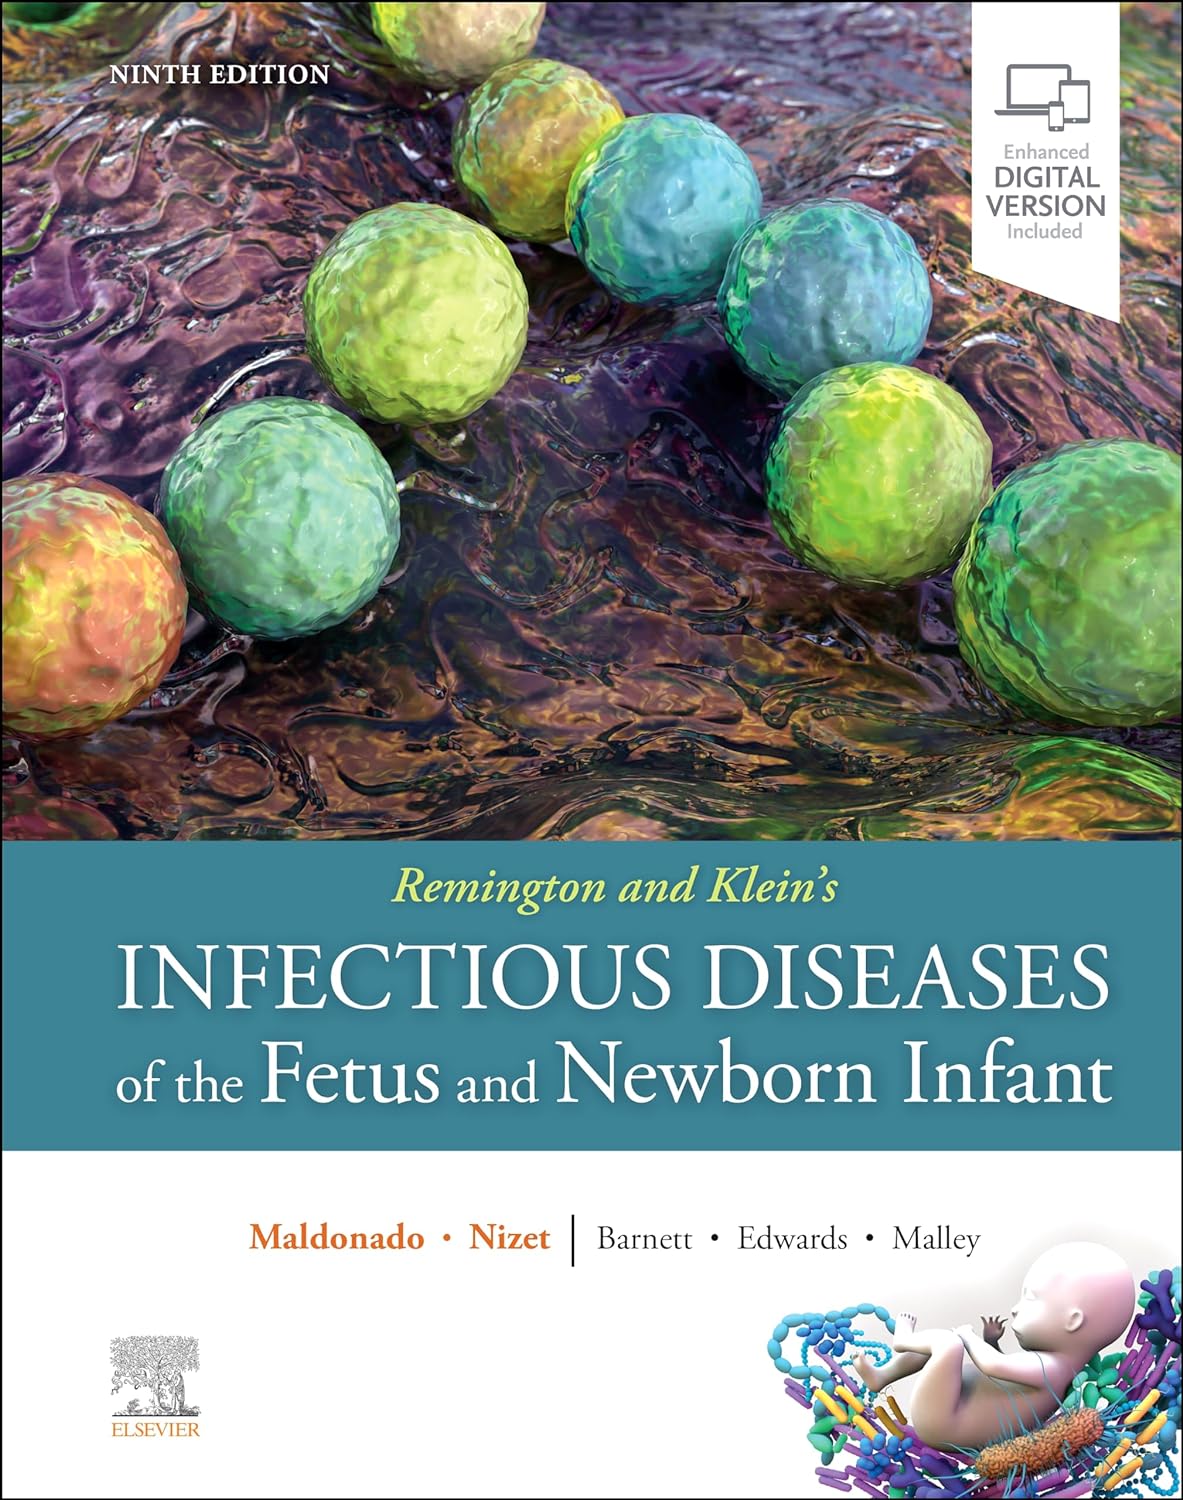 Remington and Klein's Infectious Diseases of the Fetus and Newborn Infant-9판